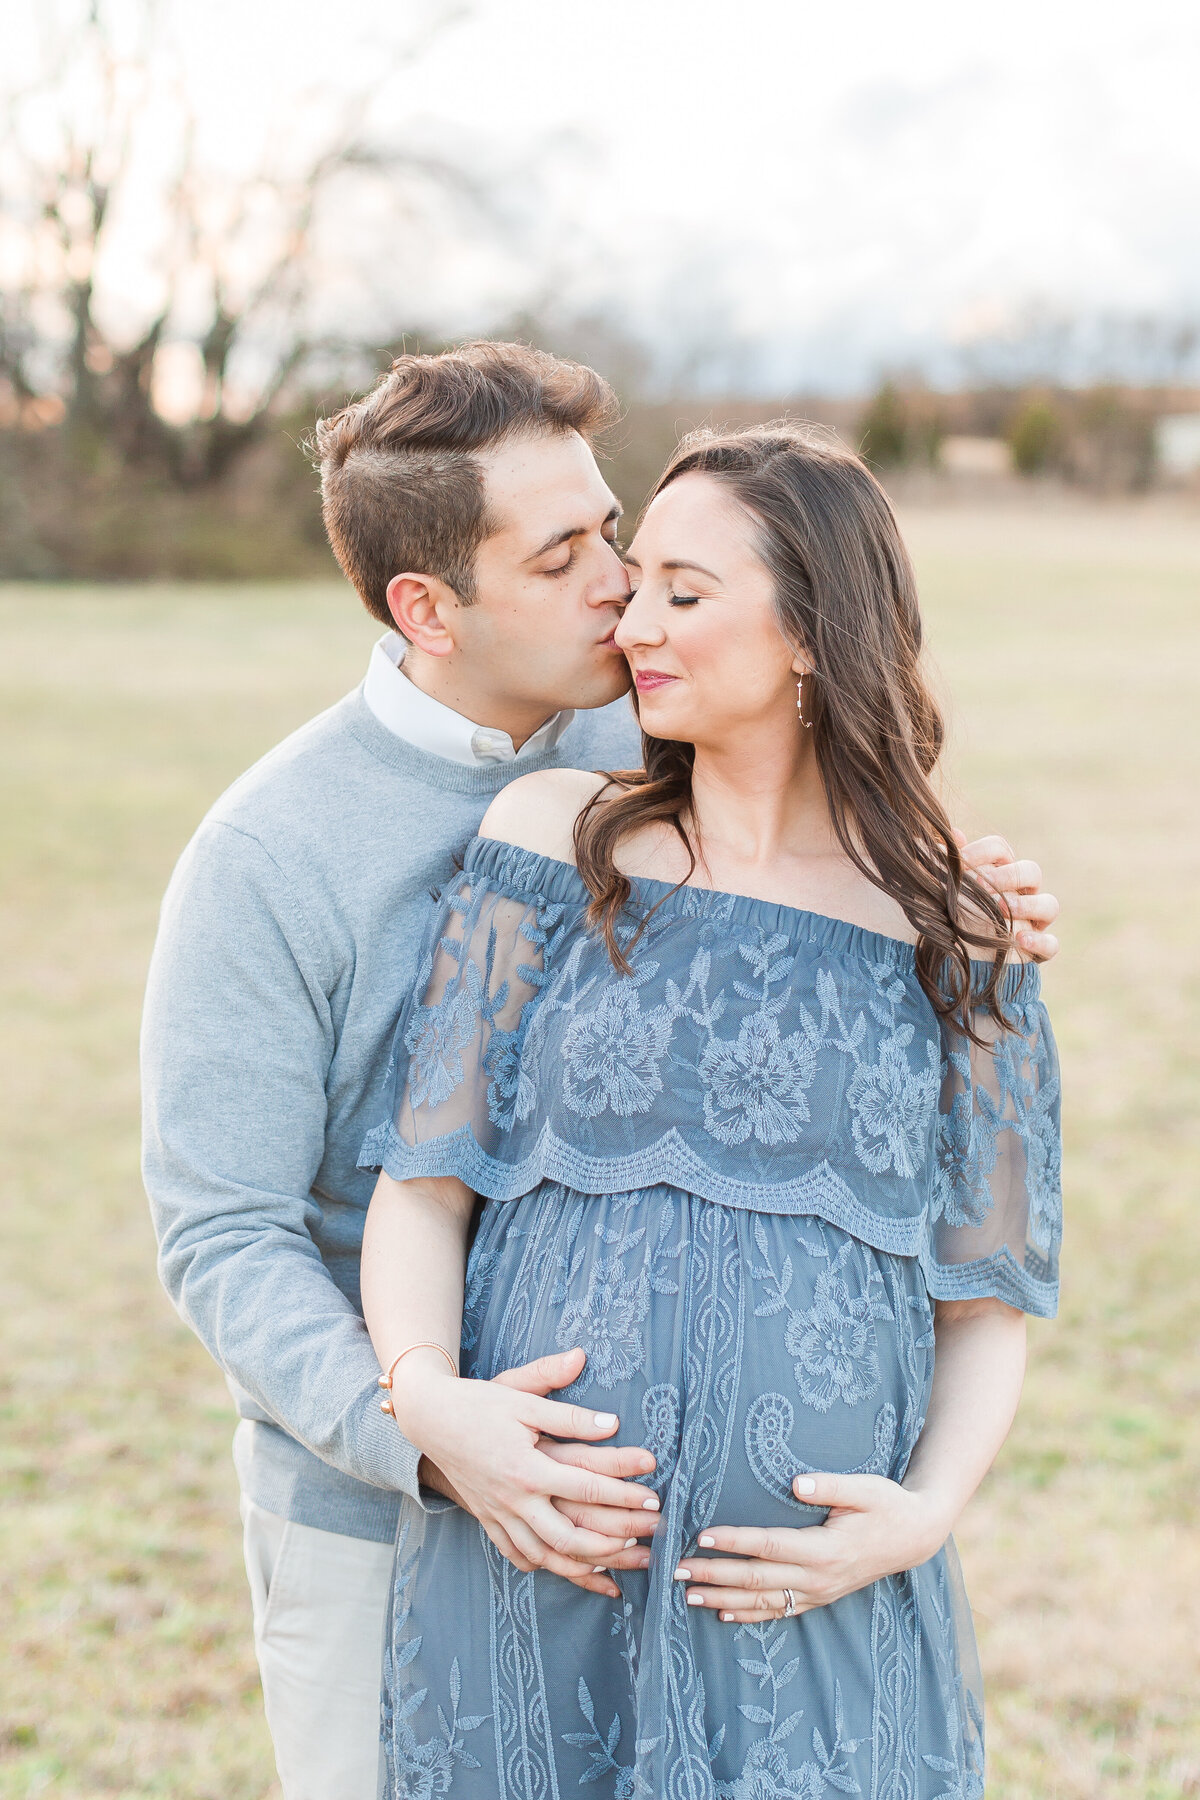 An outdoor photo of a couple embracing by Northern Virginia Maternity Photographer Northern Virginia Maternity Photographer